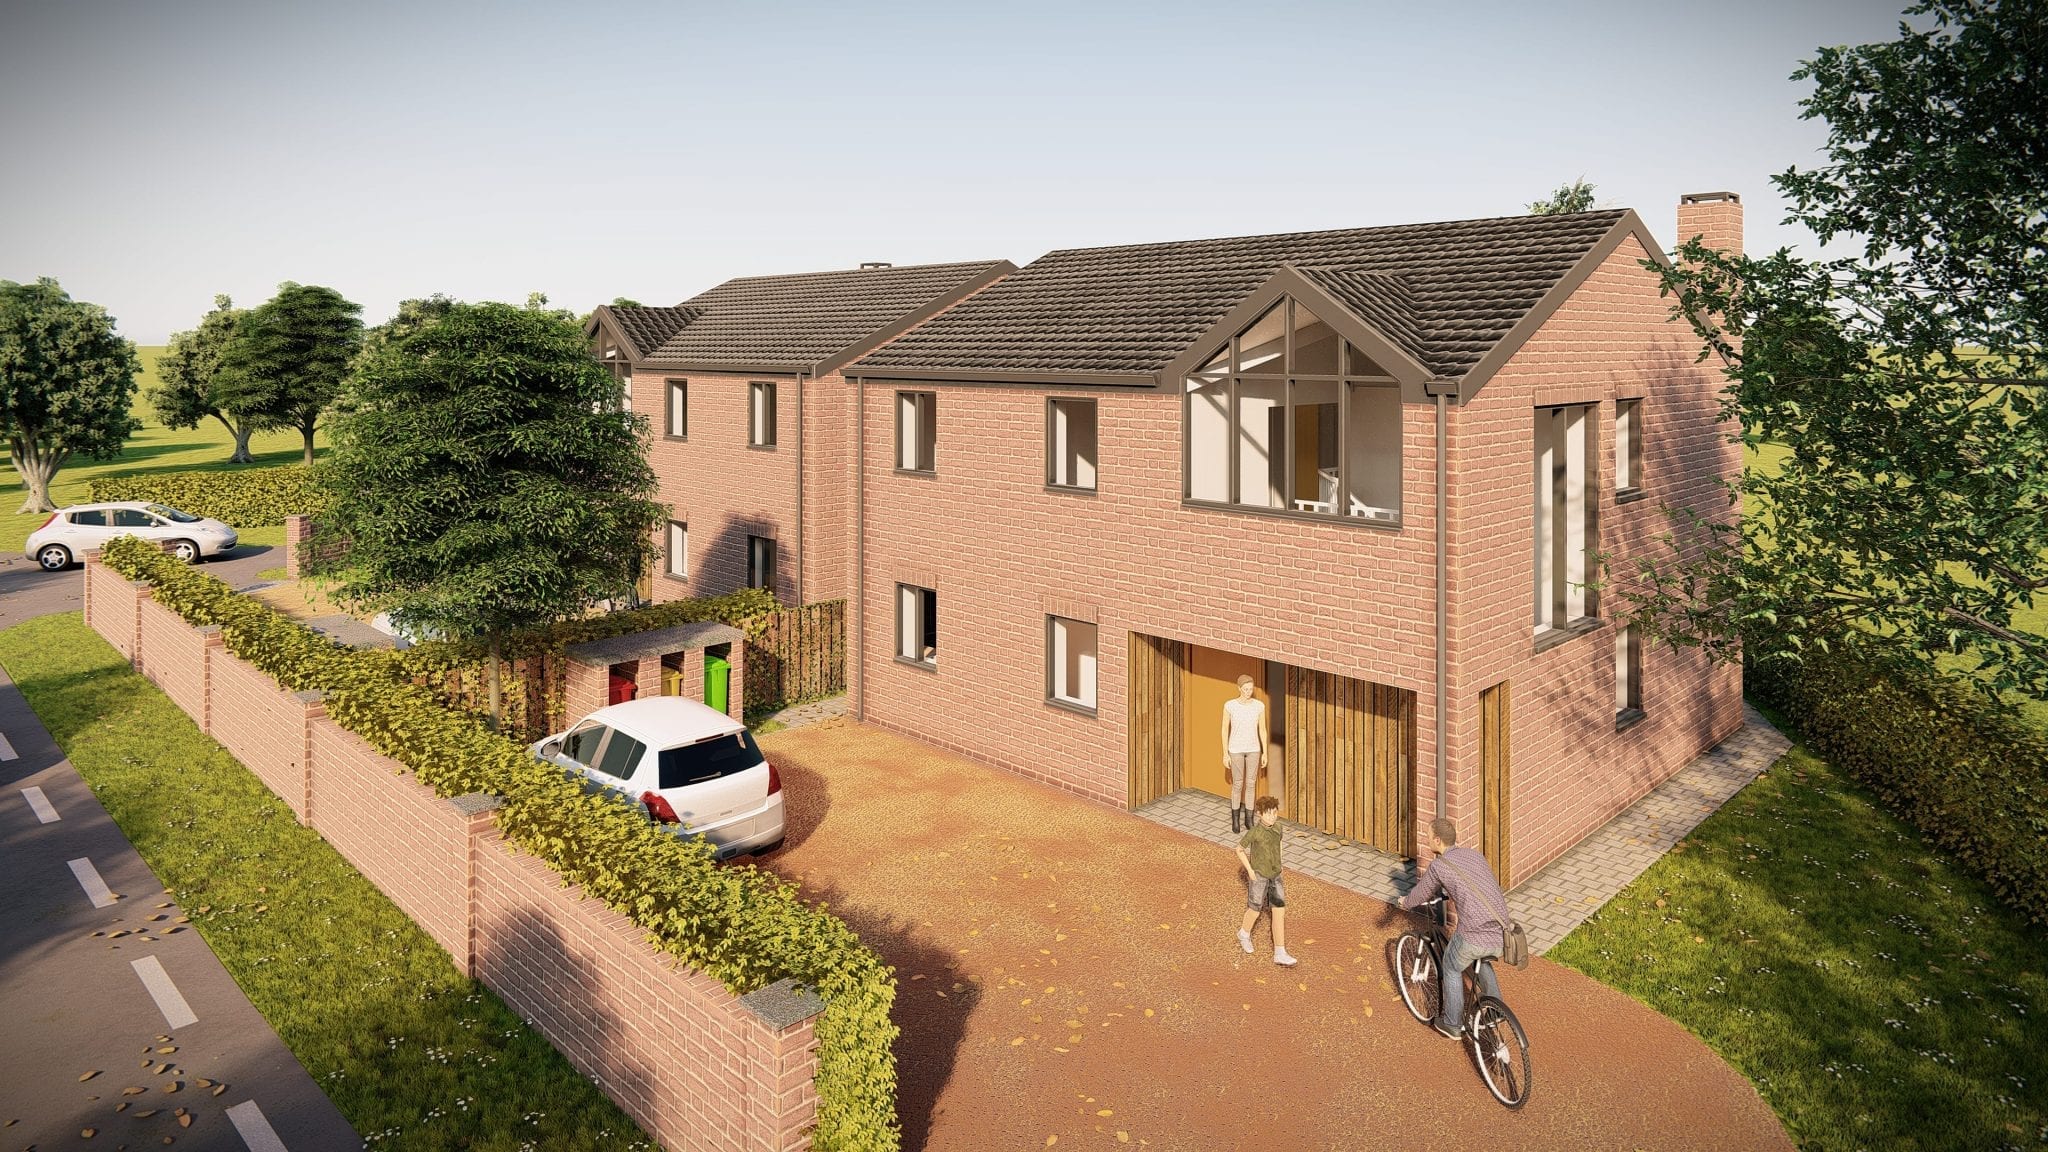 design concept for two rural dwellings holmes chapel